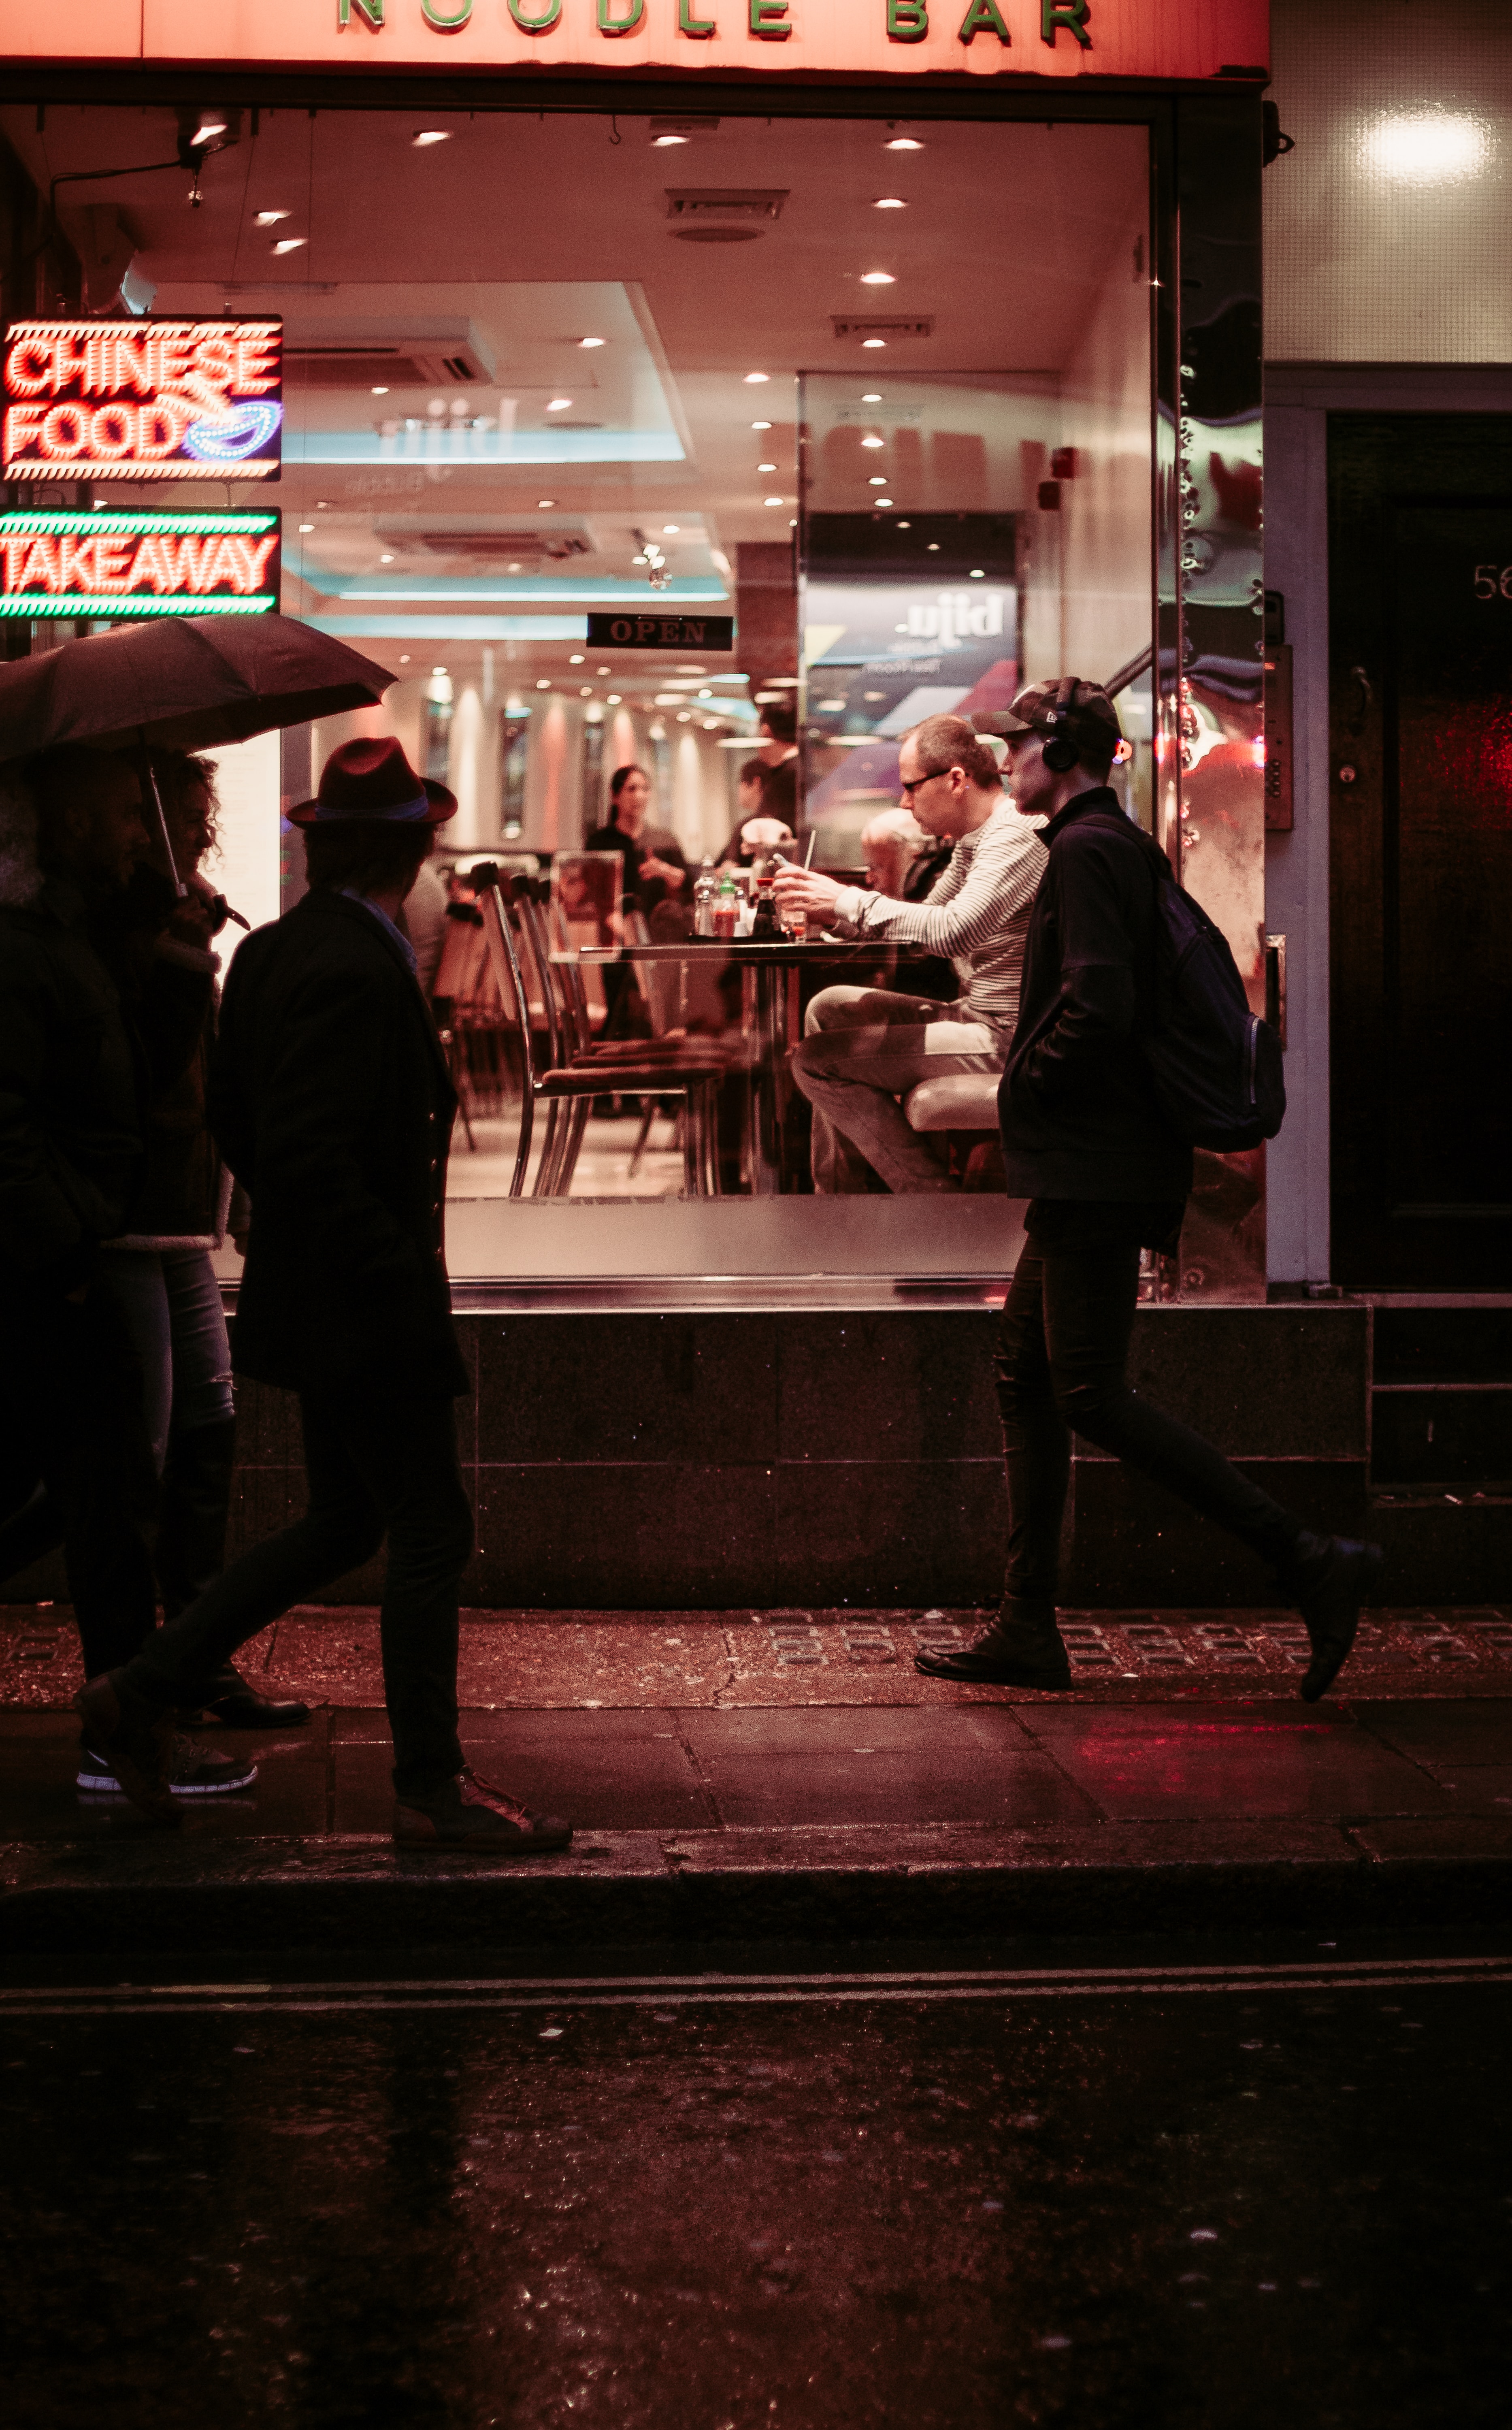 People walking at night past the window of a Chinese restaurant.